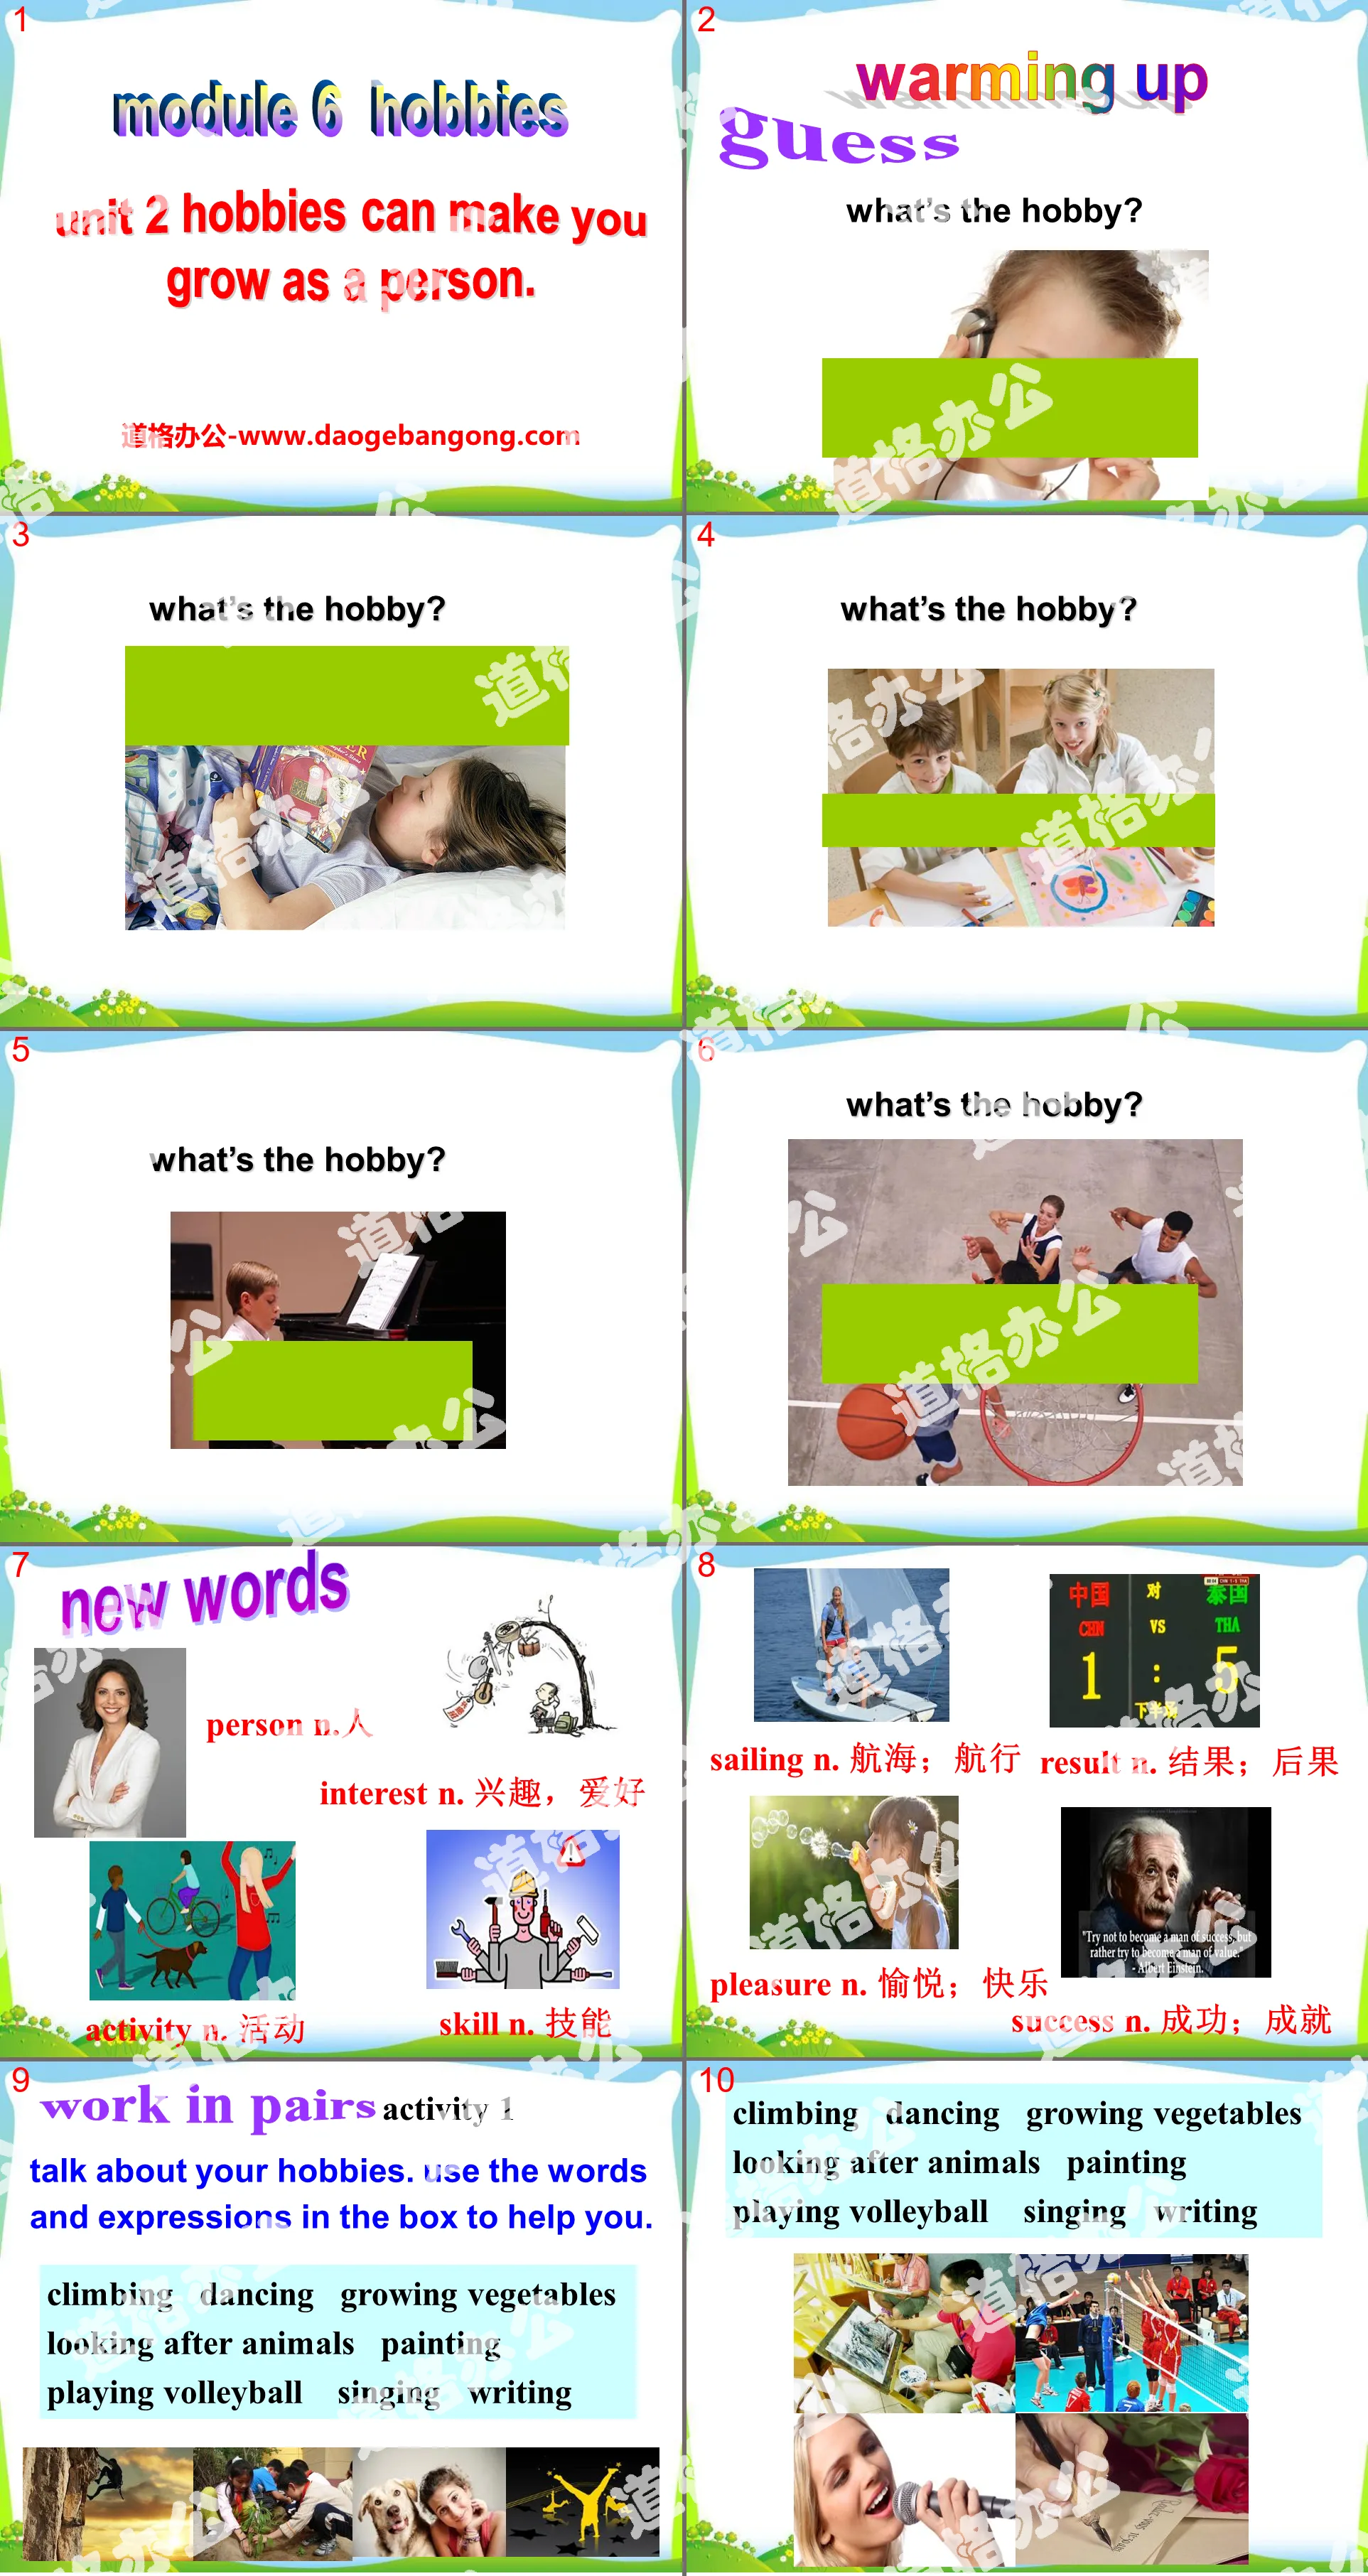 "Hobbies can make you grow as a person" Hobbies PPT courseware 3